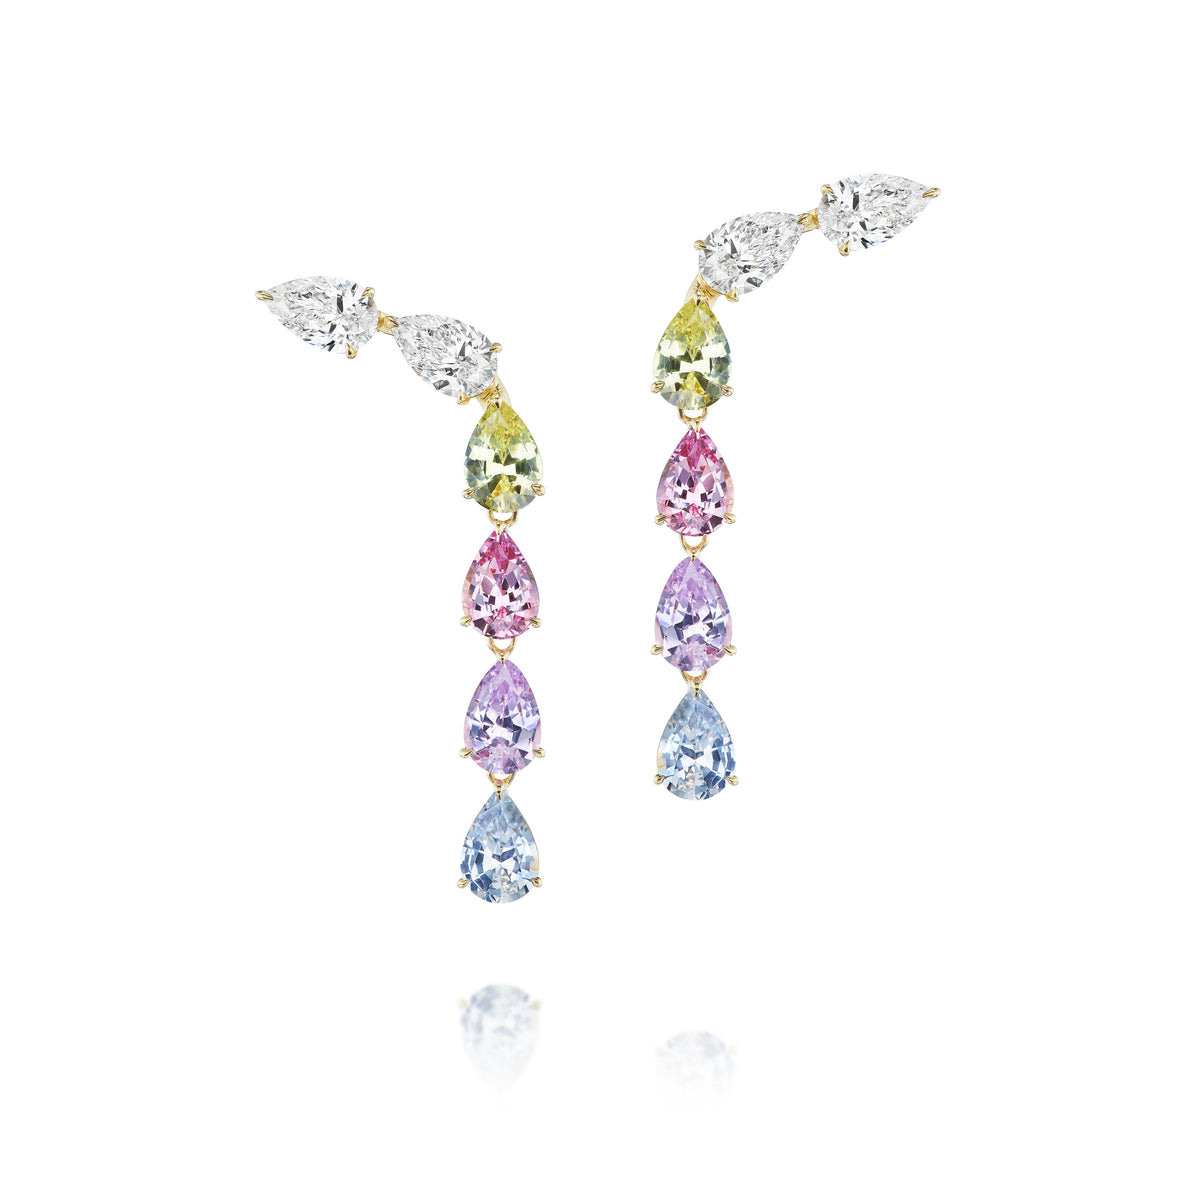 Multicolor Waterfall Earrings with Pear Shape Diamonds and Sapphires